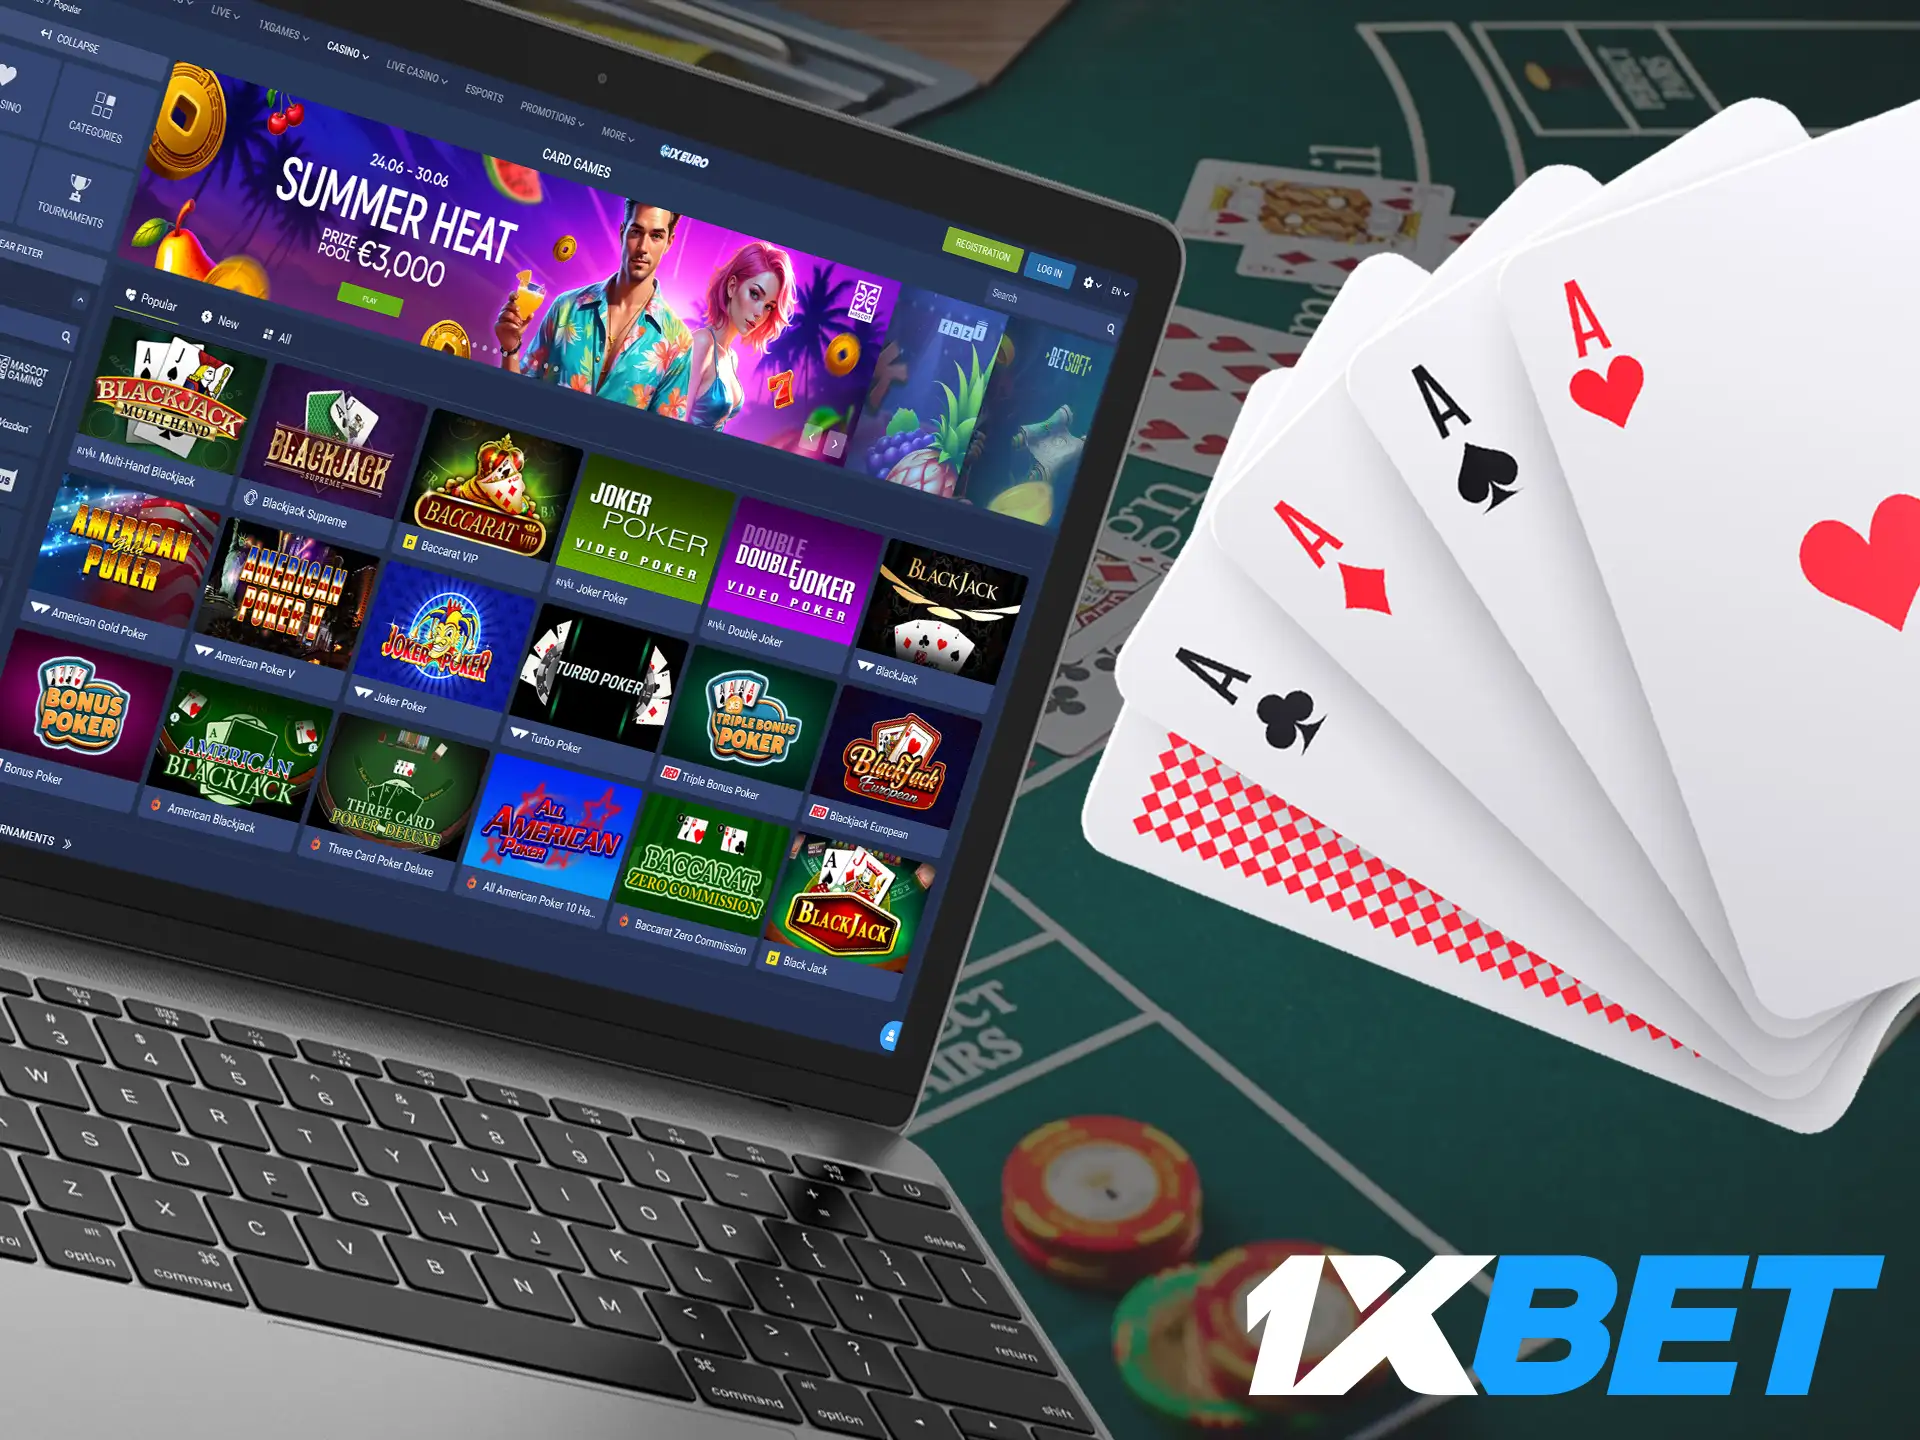 Dive into the world of table games and experience the thrill of the challenge at 1xBet.